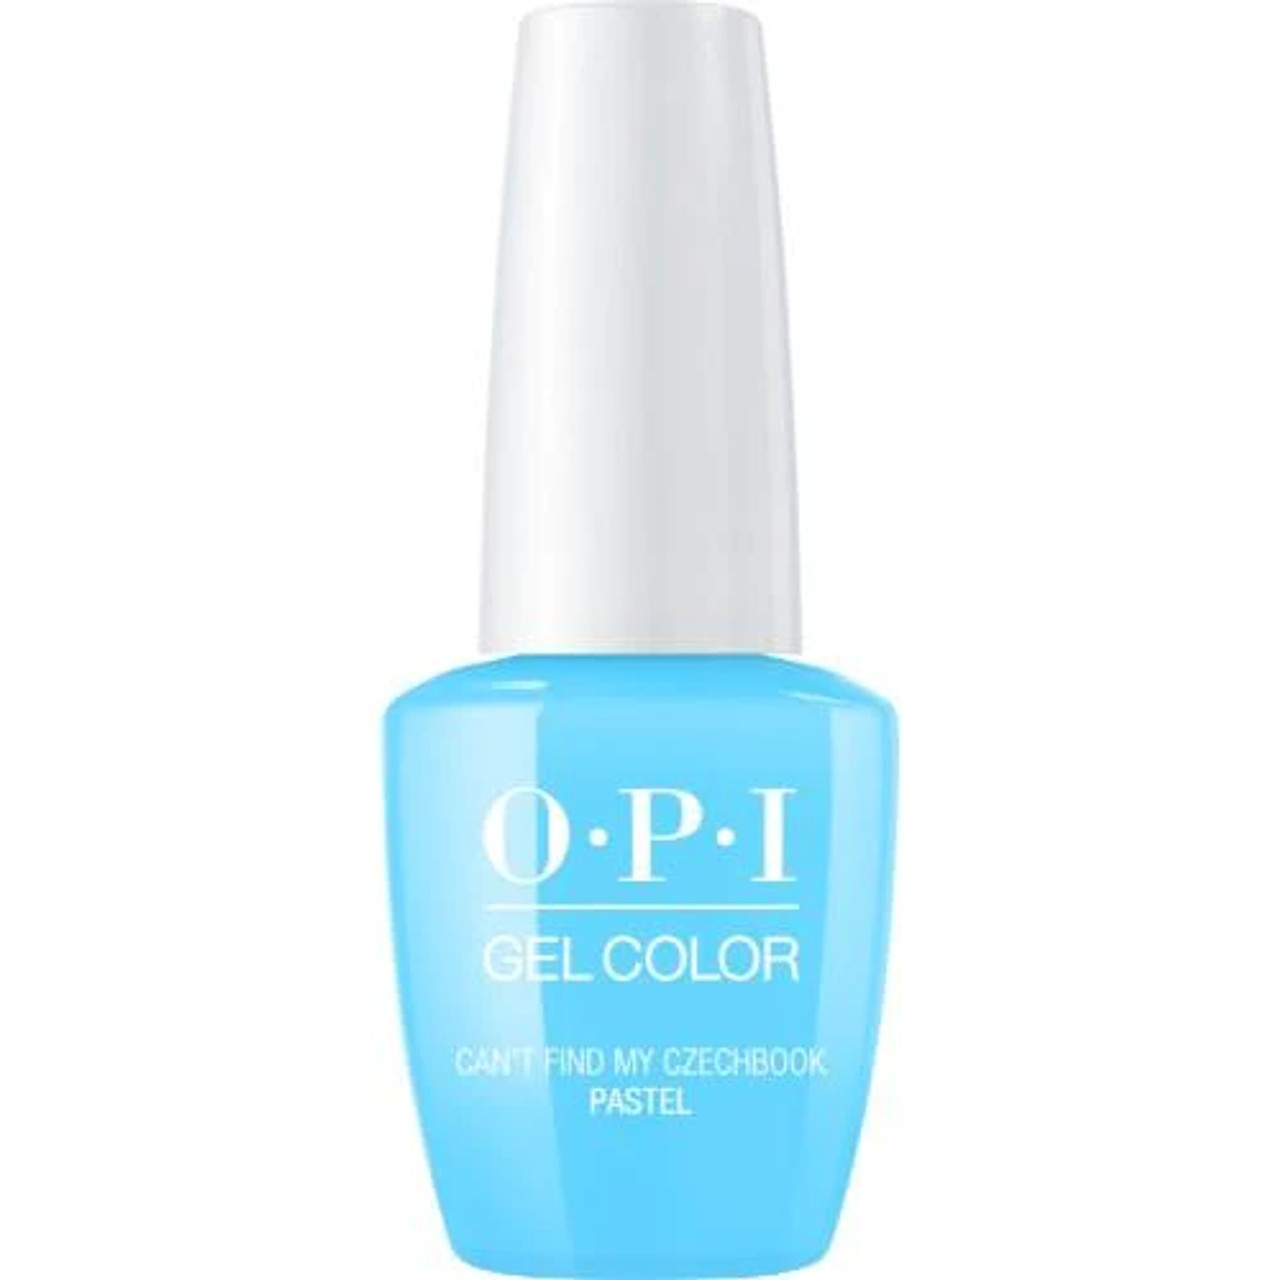 OPI GelColor Pro Health Can’t Find My Czechbook - .5 Oz / 15 mL